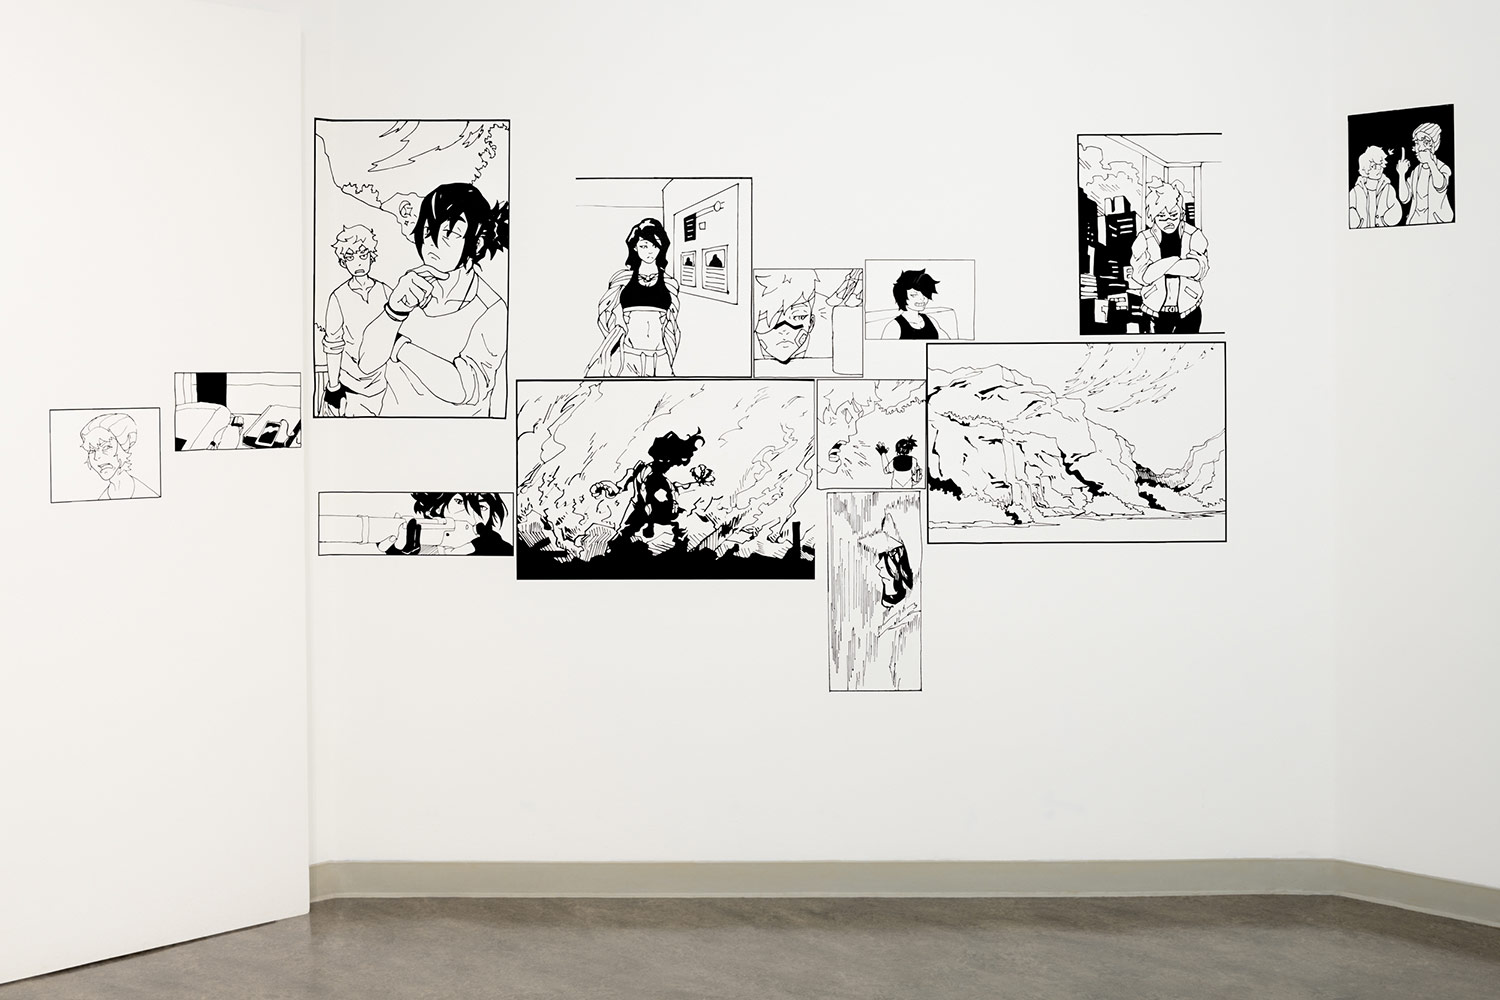 Photograph of a multi-panel comic rendered in vinyl installed in the Vachon Gallery